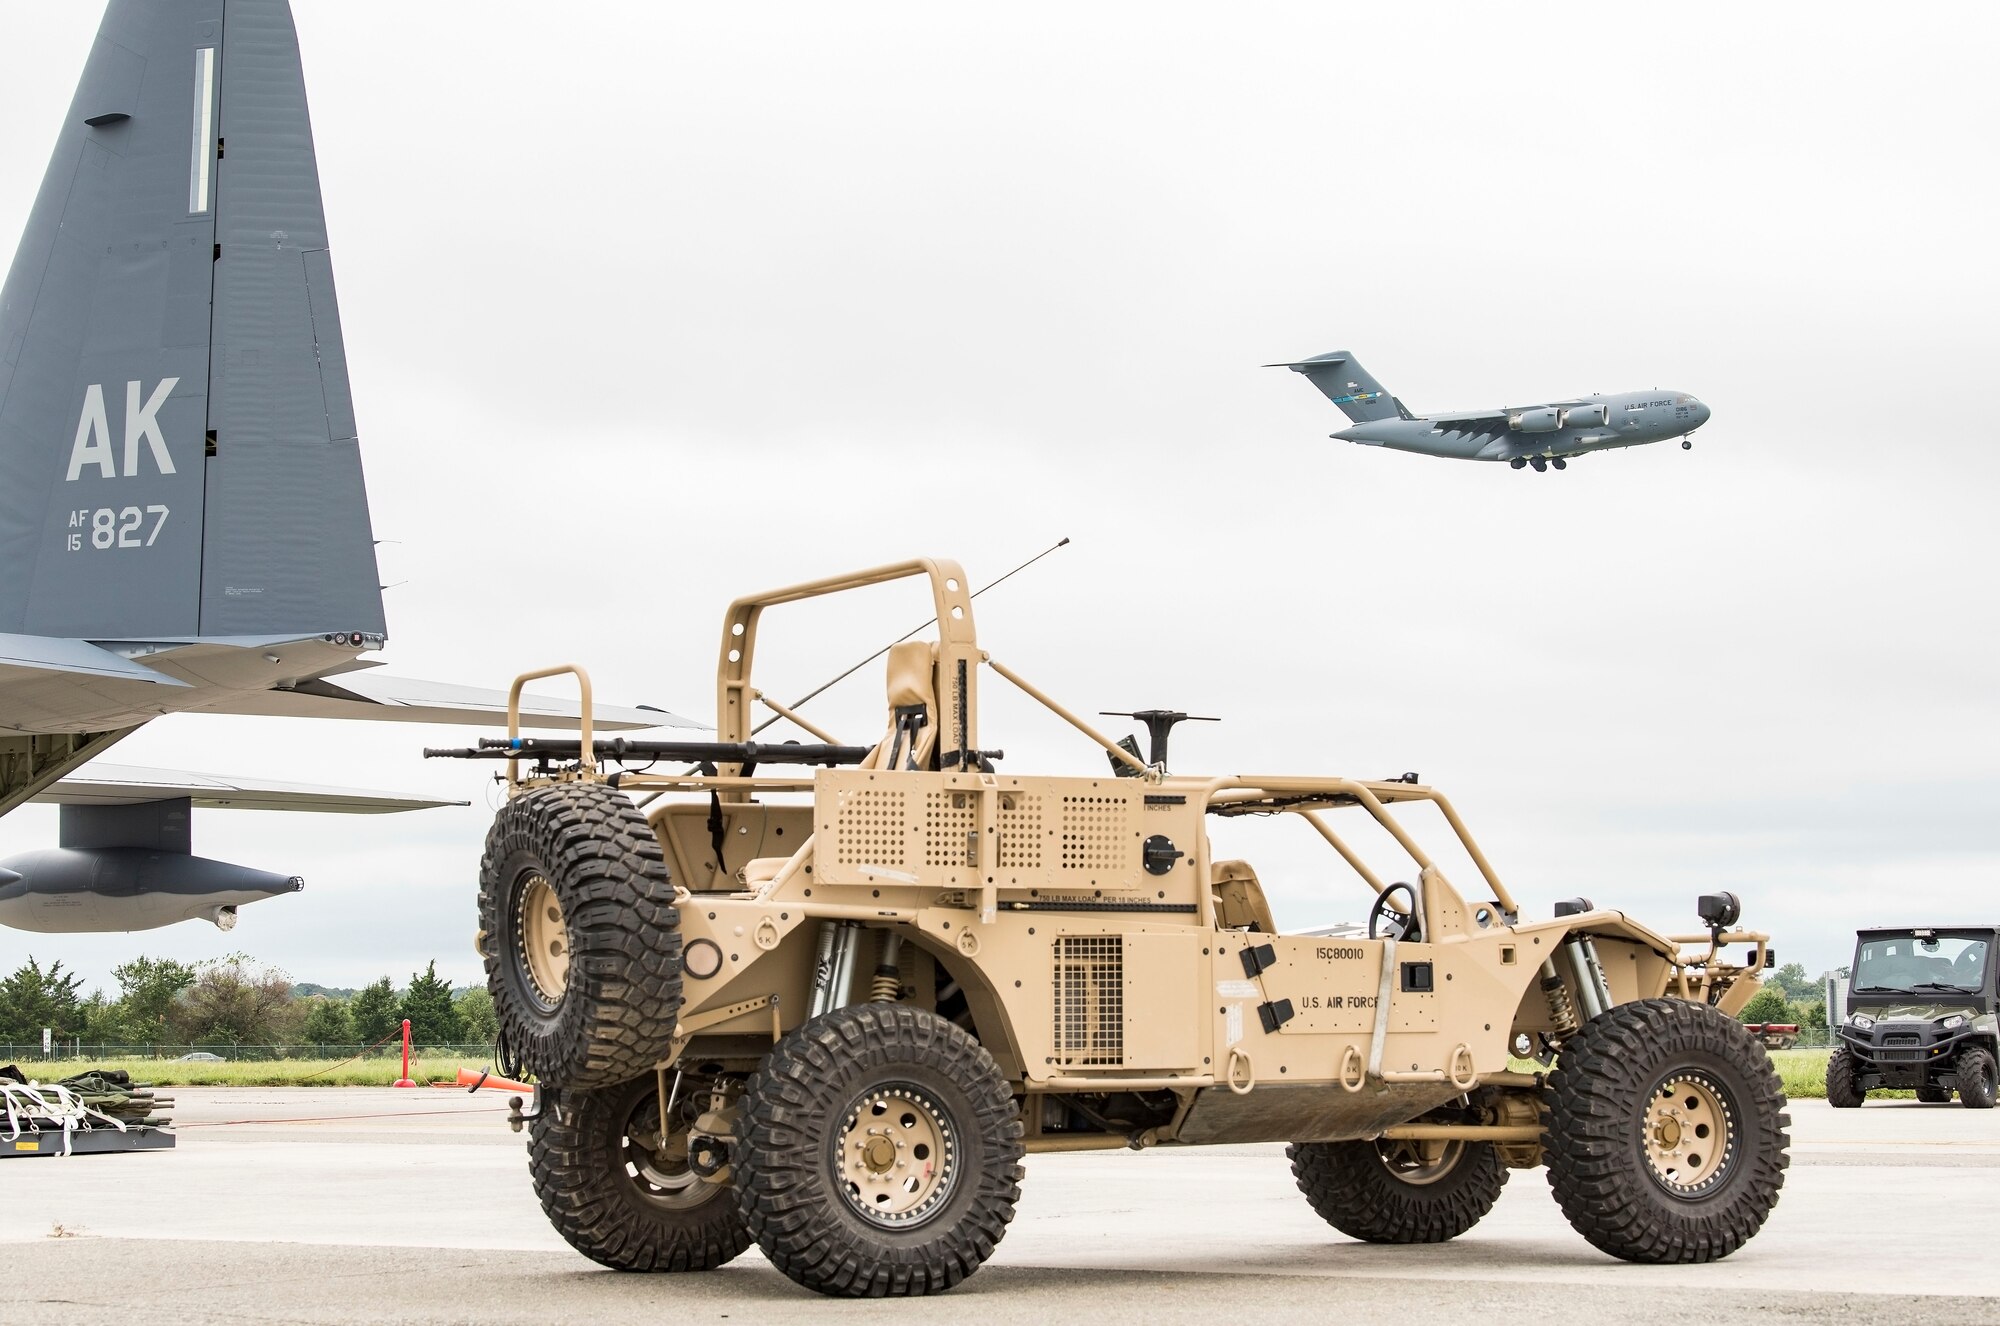 A Guardian Angel Air-droppable Rescue Vehicle assigned to the Alaska Air National Guard, 176th Wing, Joint Base Elmendorf-Richardson, Alaska, sits near the tail of a HC-130J while a C-17 Globemaster III flies in the background Sept. 13, 2018, at Dover Air Force Base, Del. Members and equipment from the 176th Wing, 176th Aircraft Maintenance Squadron, 211th and 212th Rescue Squadrons at JBER arrived at Dover on Sept. 12 to support hurricane relief efforts when called upon. (U.S. Air Force photo by Roland Balik)